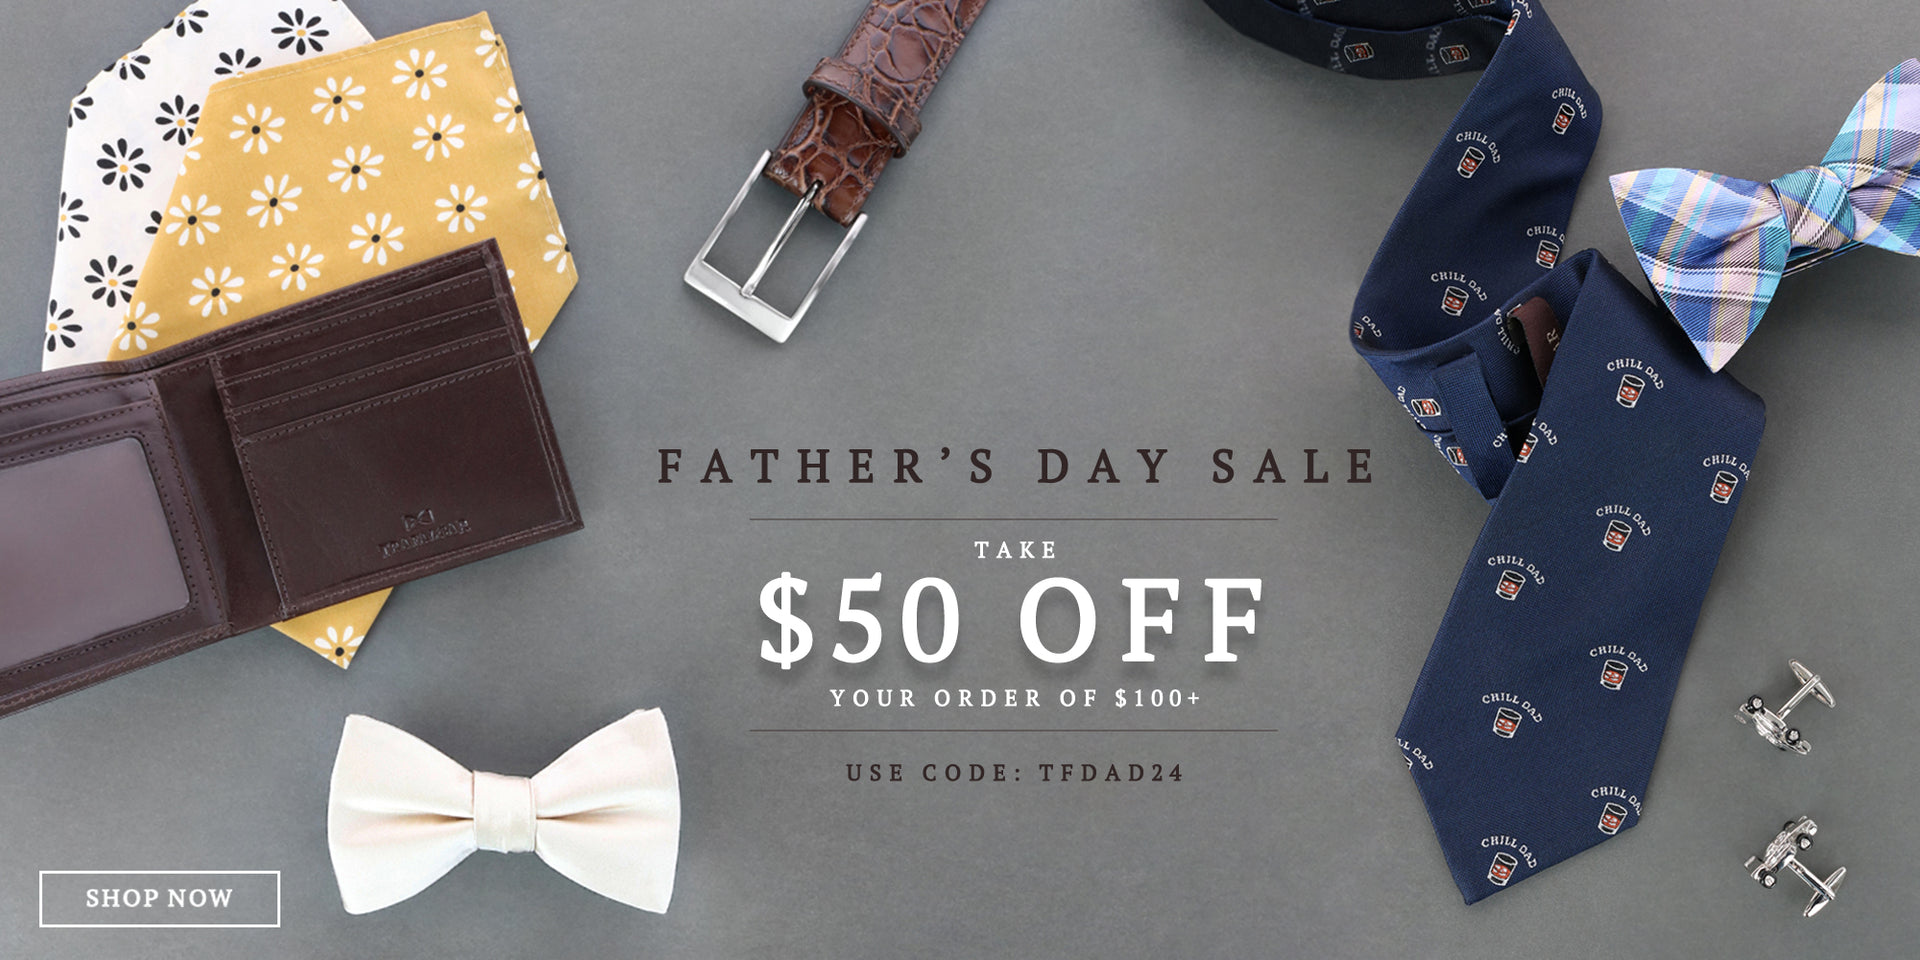 Father's Day Sale, take $50 off your order of $100+ use code: TFDAD24